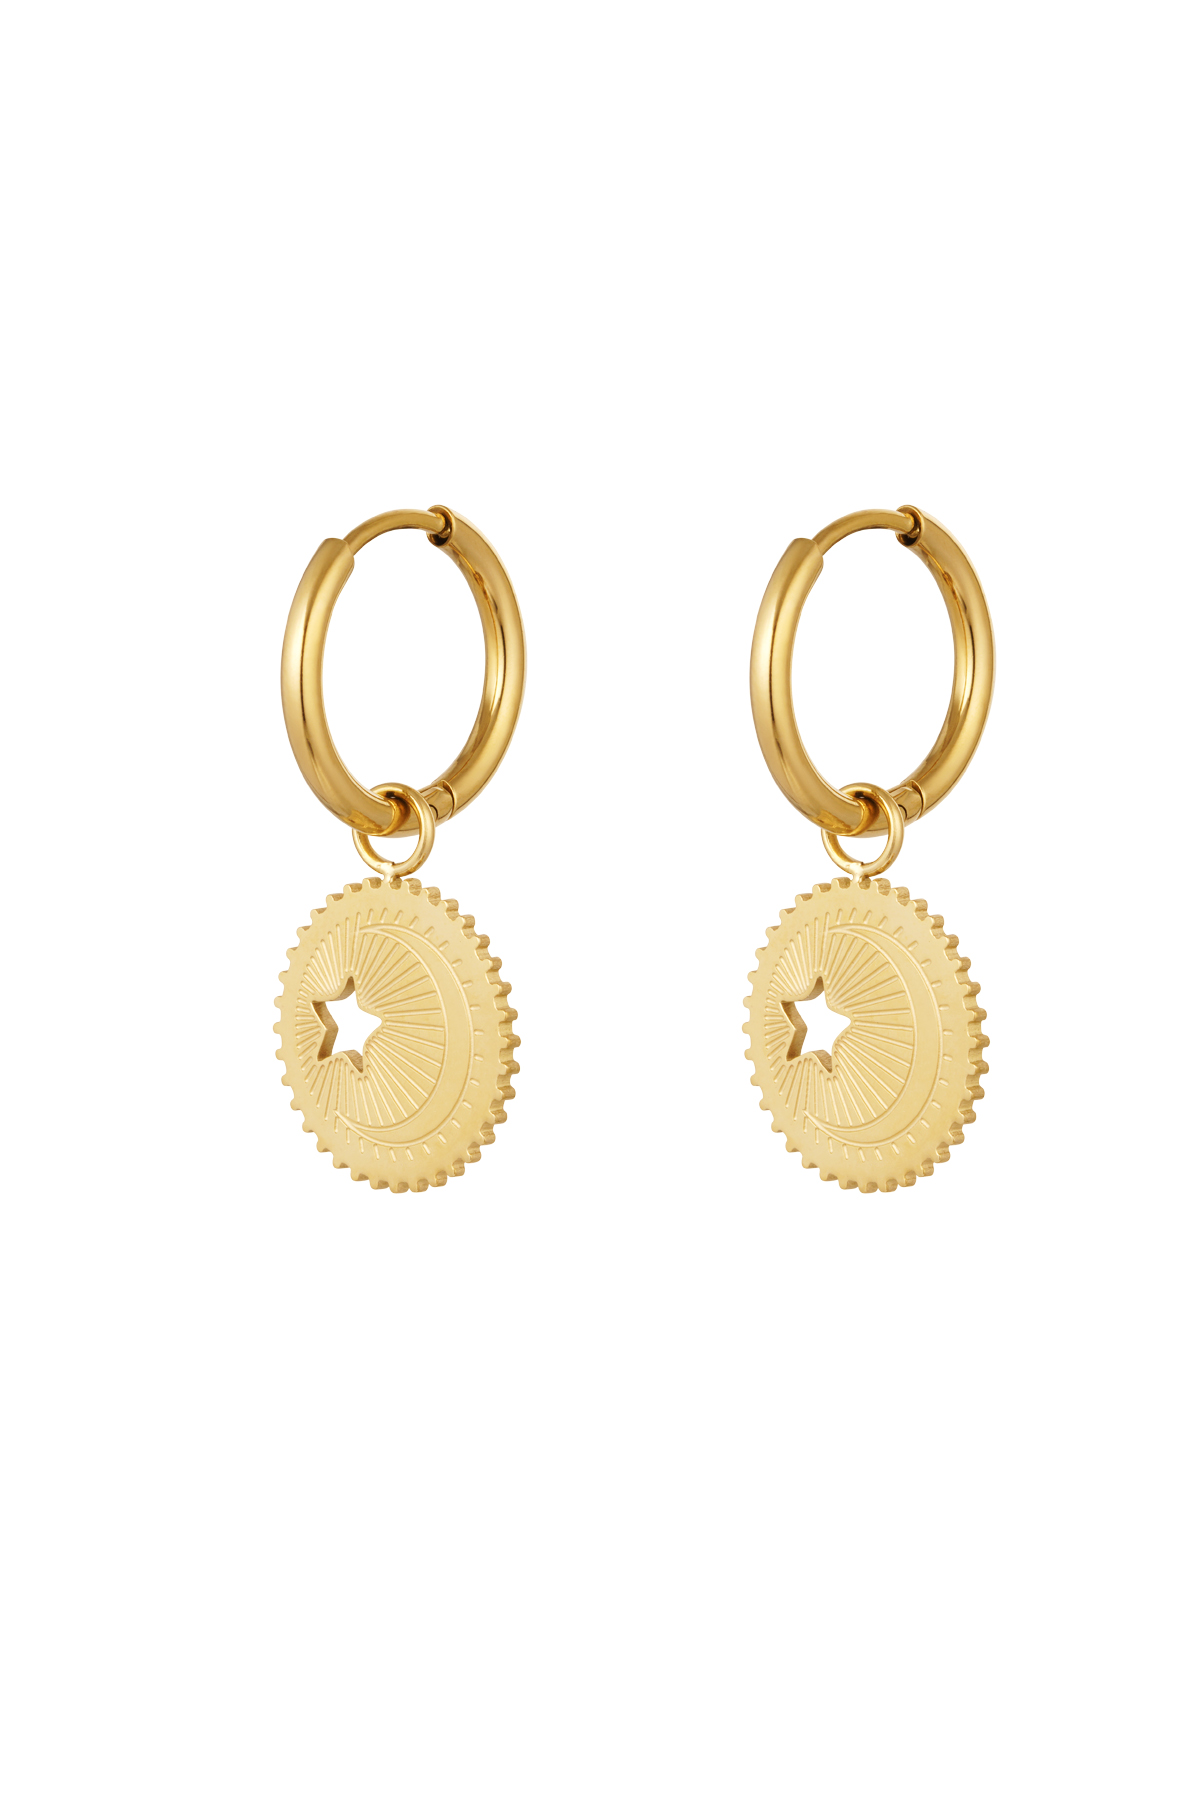 Earrings star coin - gold Stainless Steel h5 